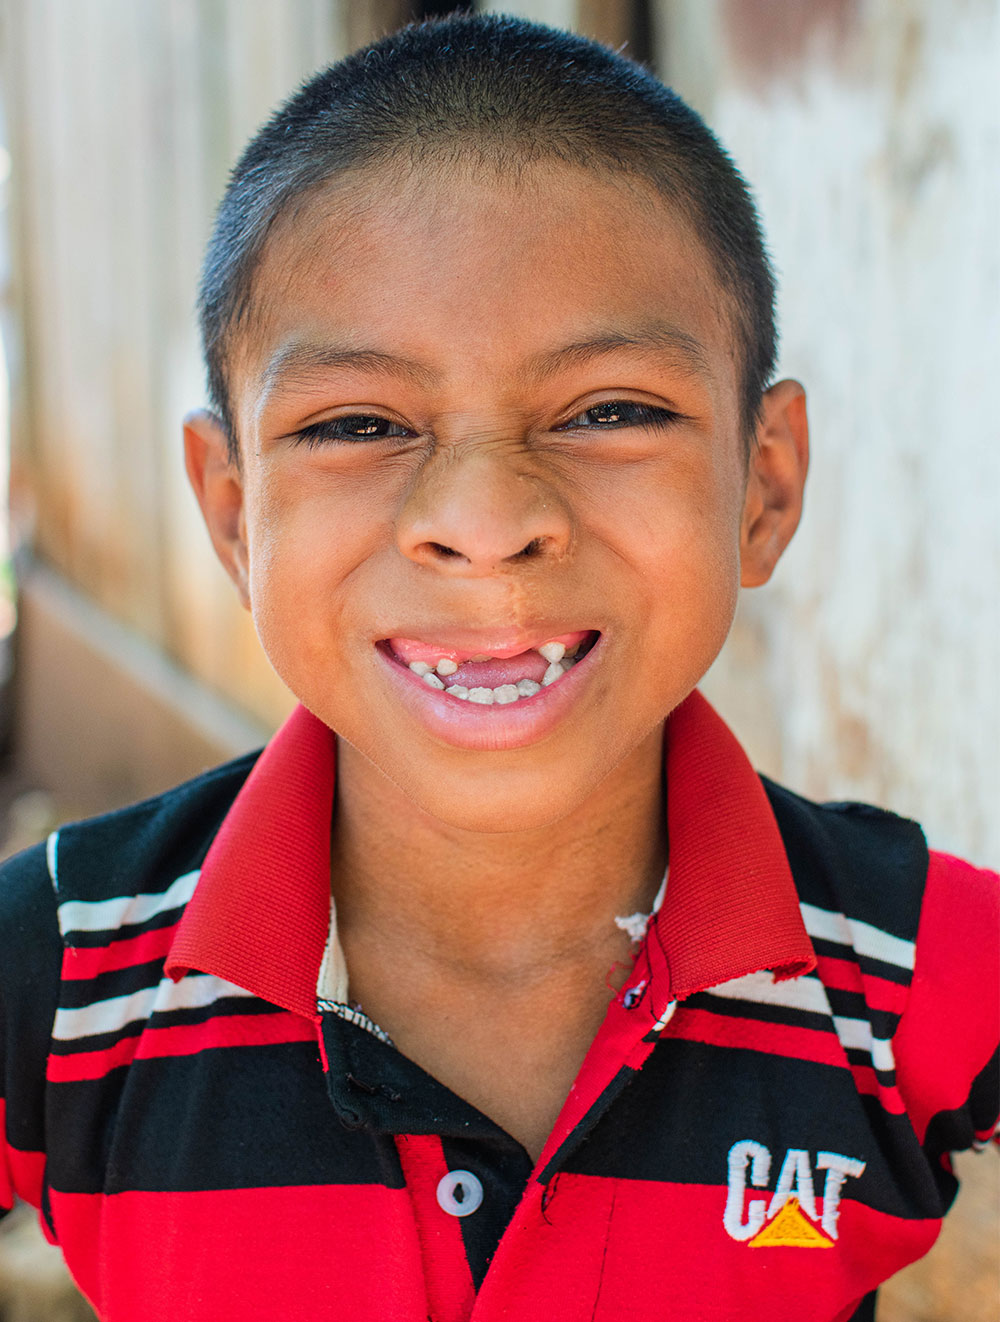 Auner flashes a toothless grin after free Smile Train cleft treatment in Guatemala